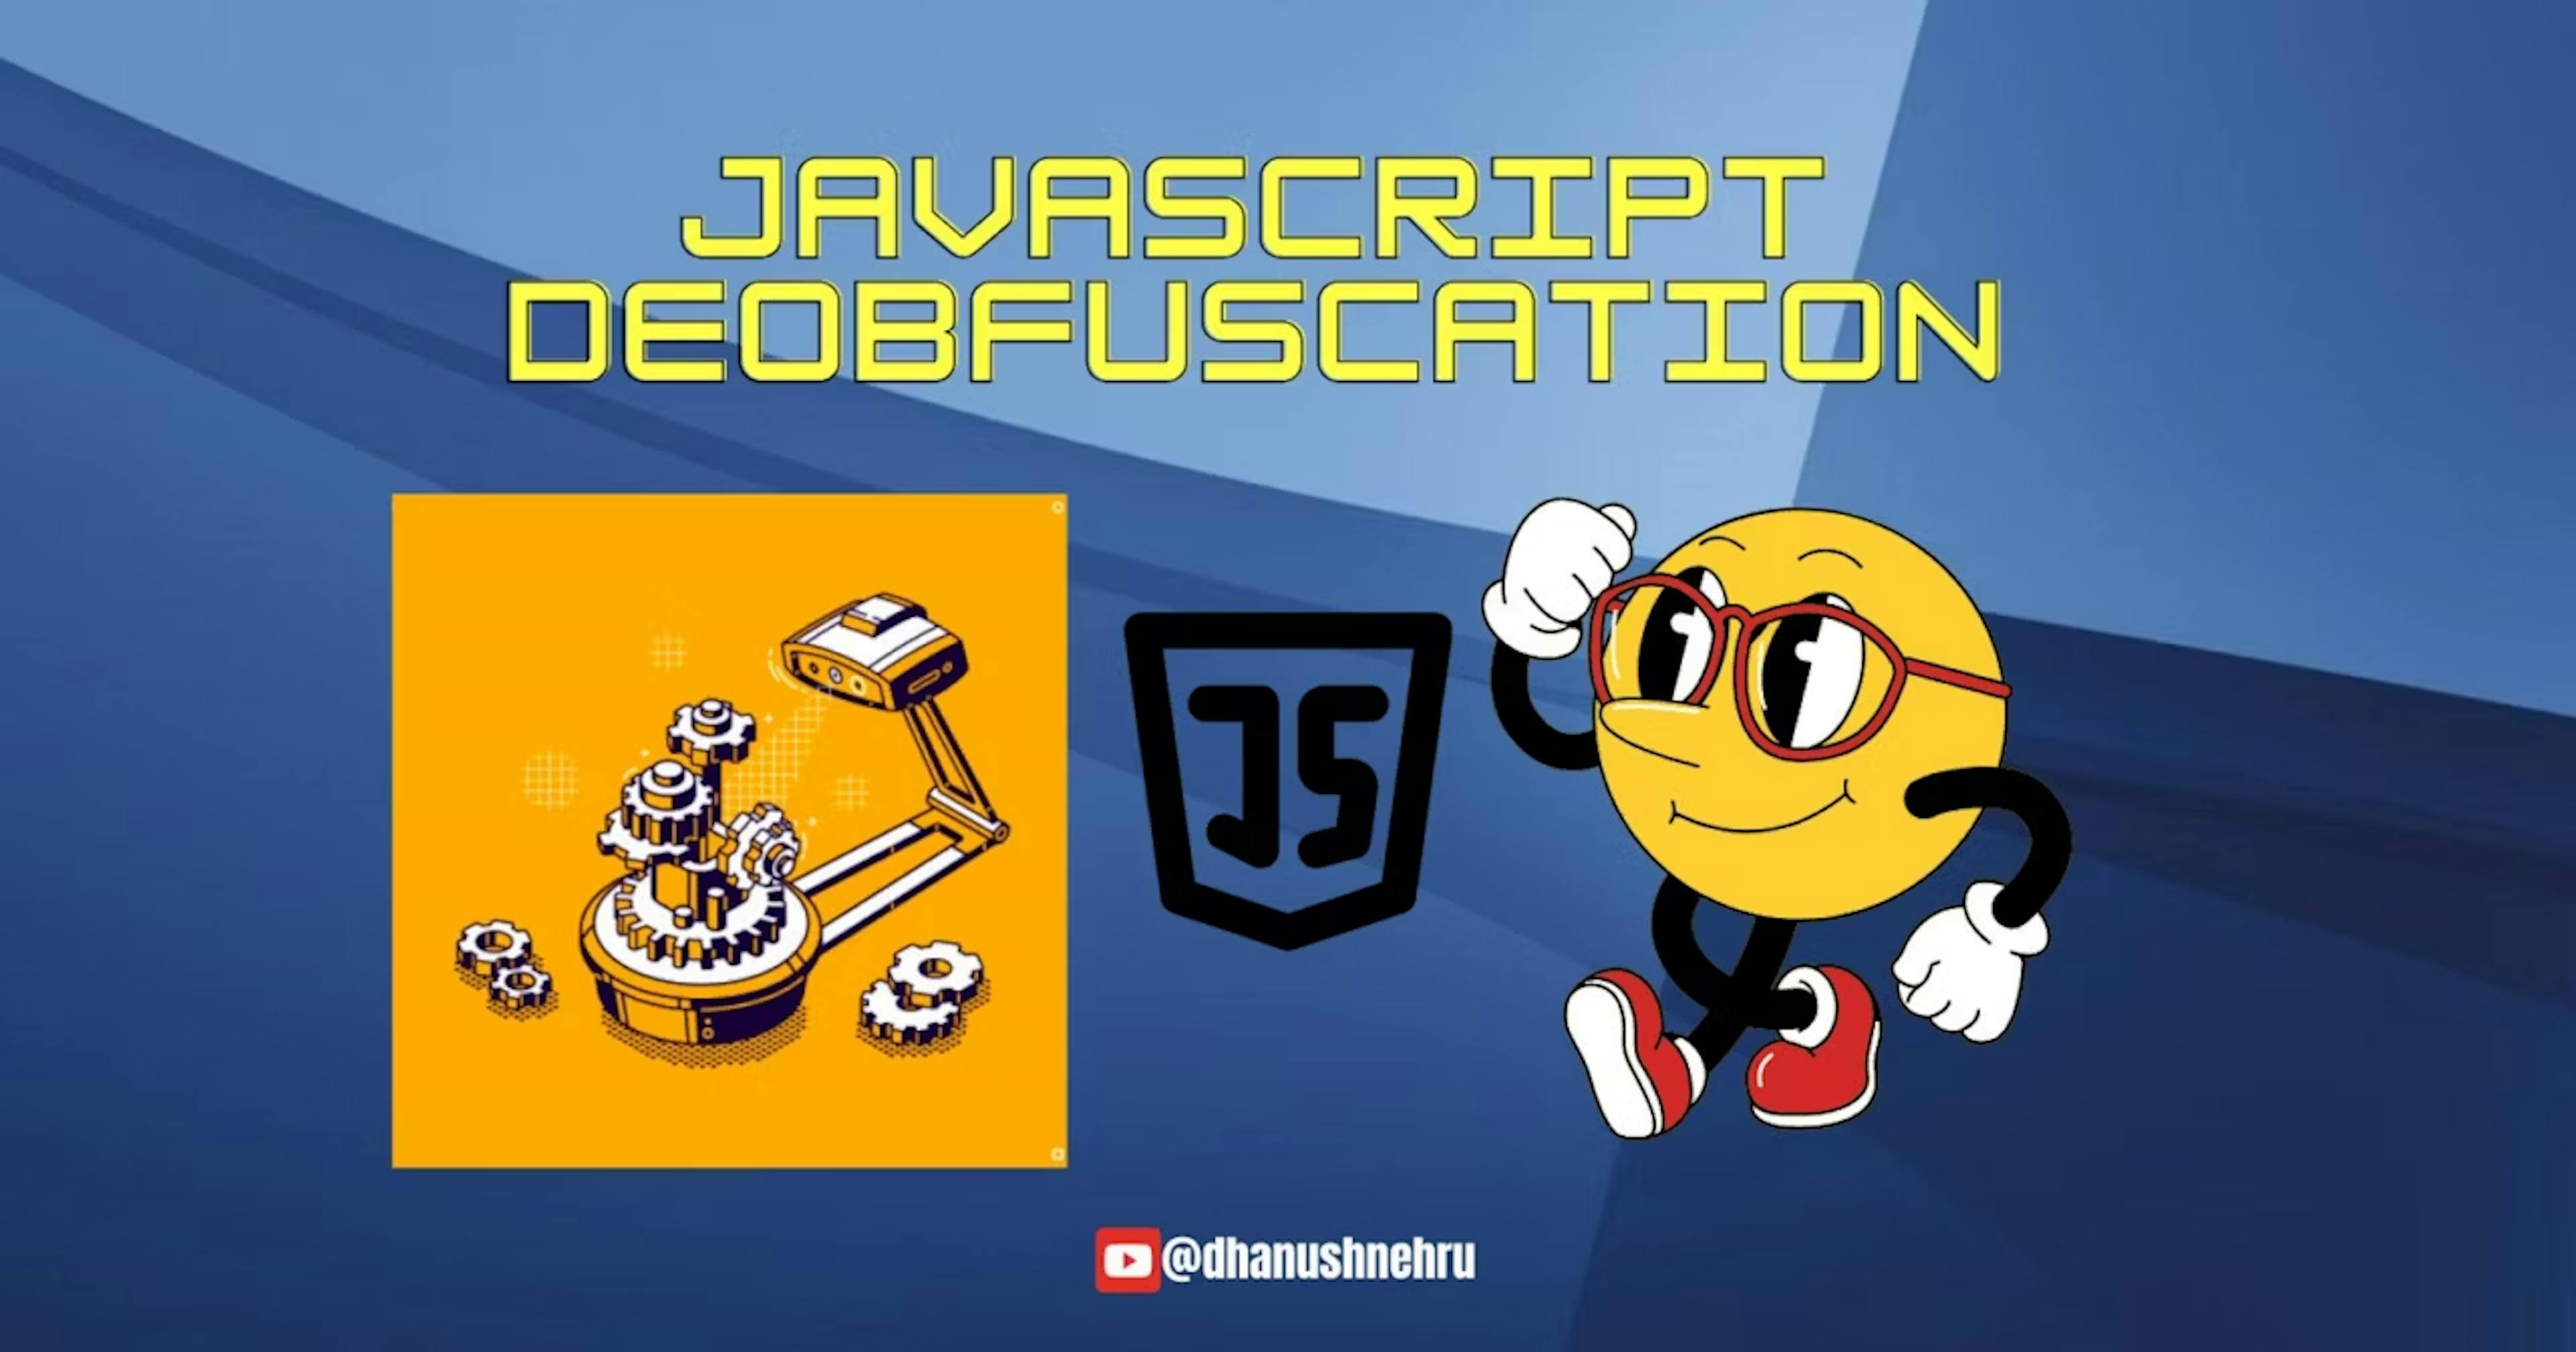 featured image - What Is Javascript Deobfuscation? Everything You Need to Know